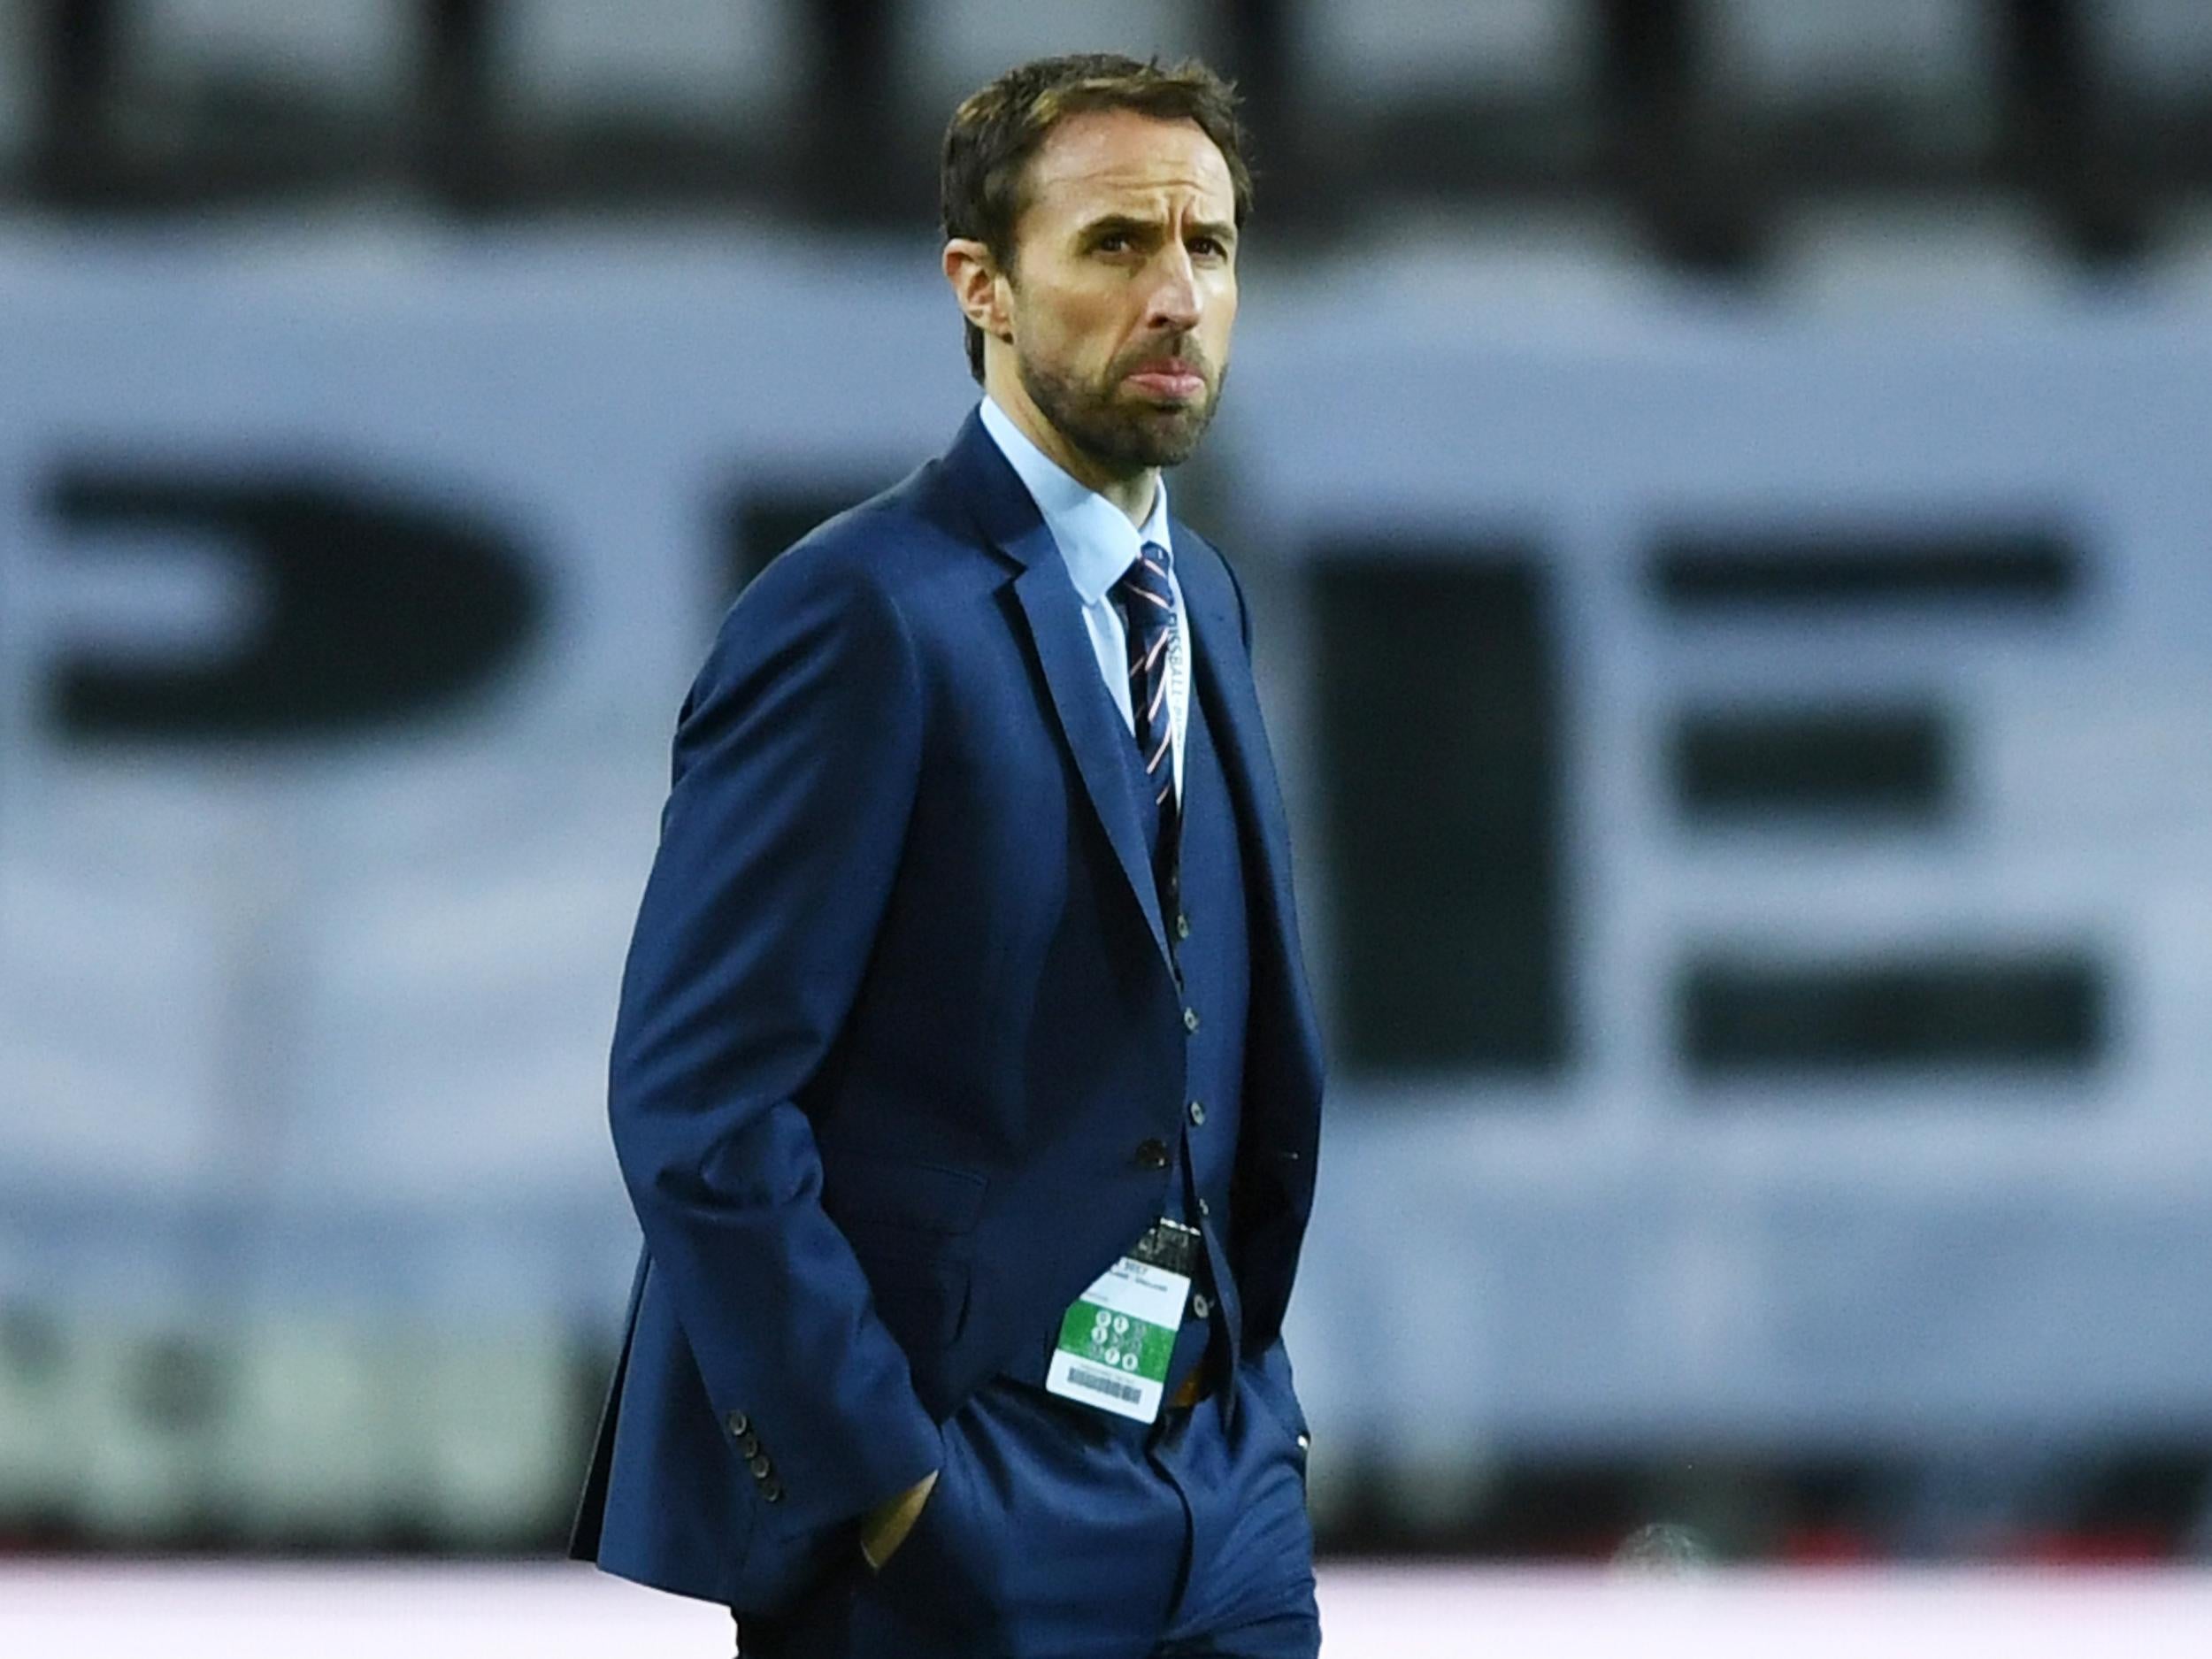 Southgate sent his thoughts to the families of those that have suffered as a result of the attack